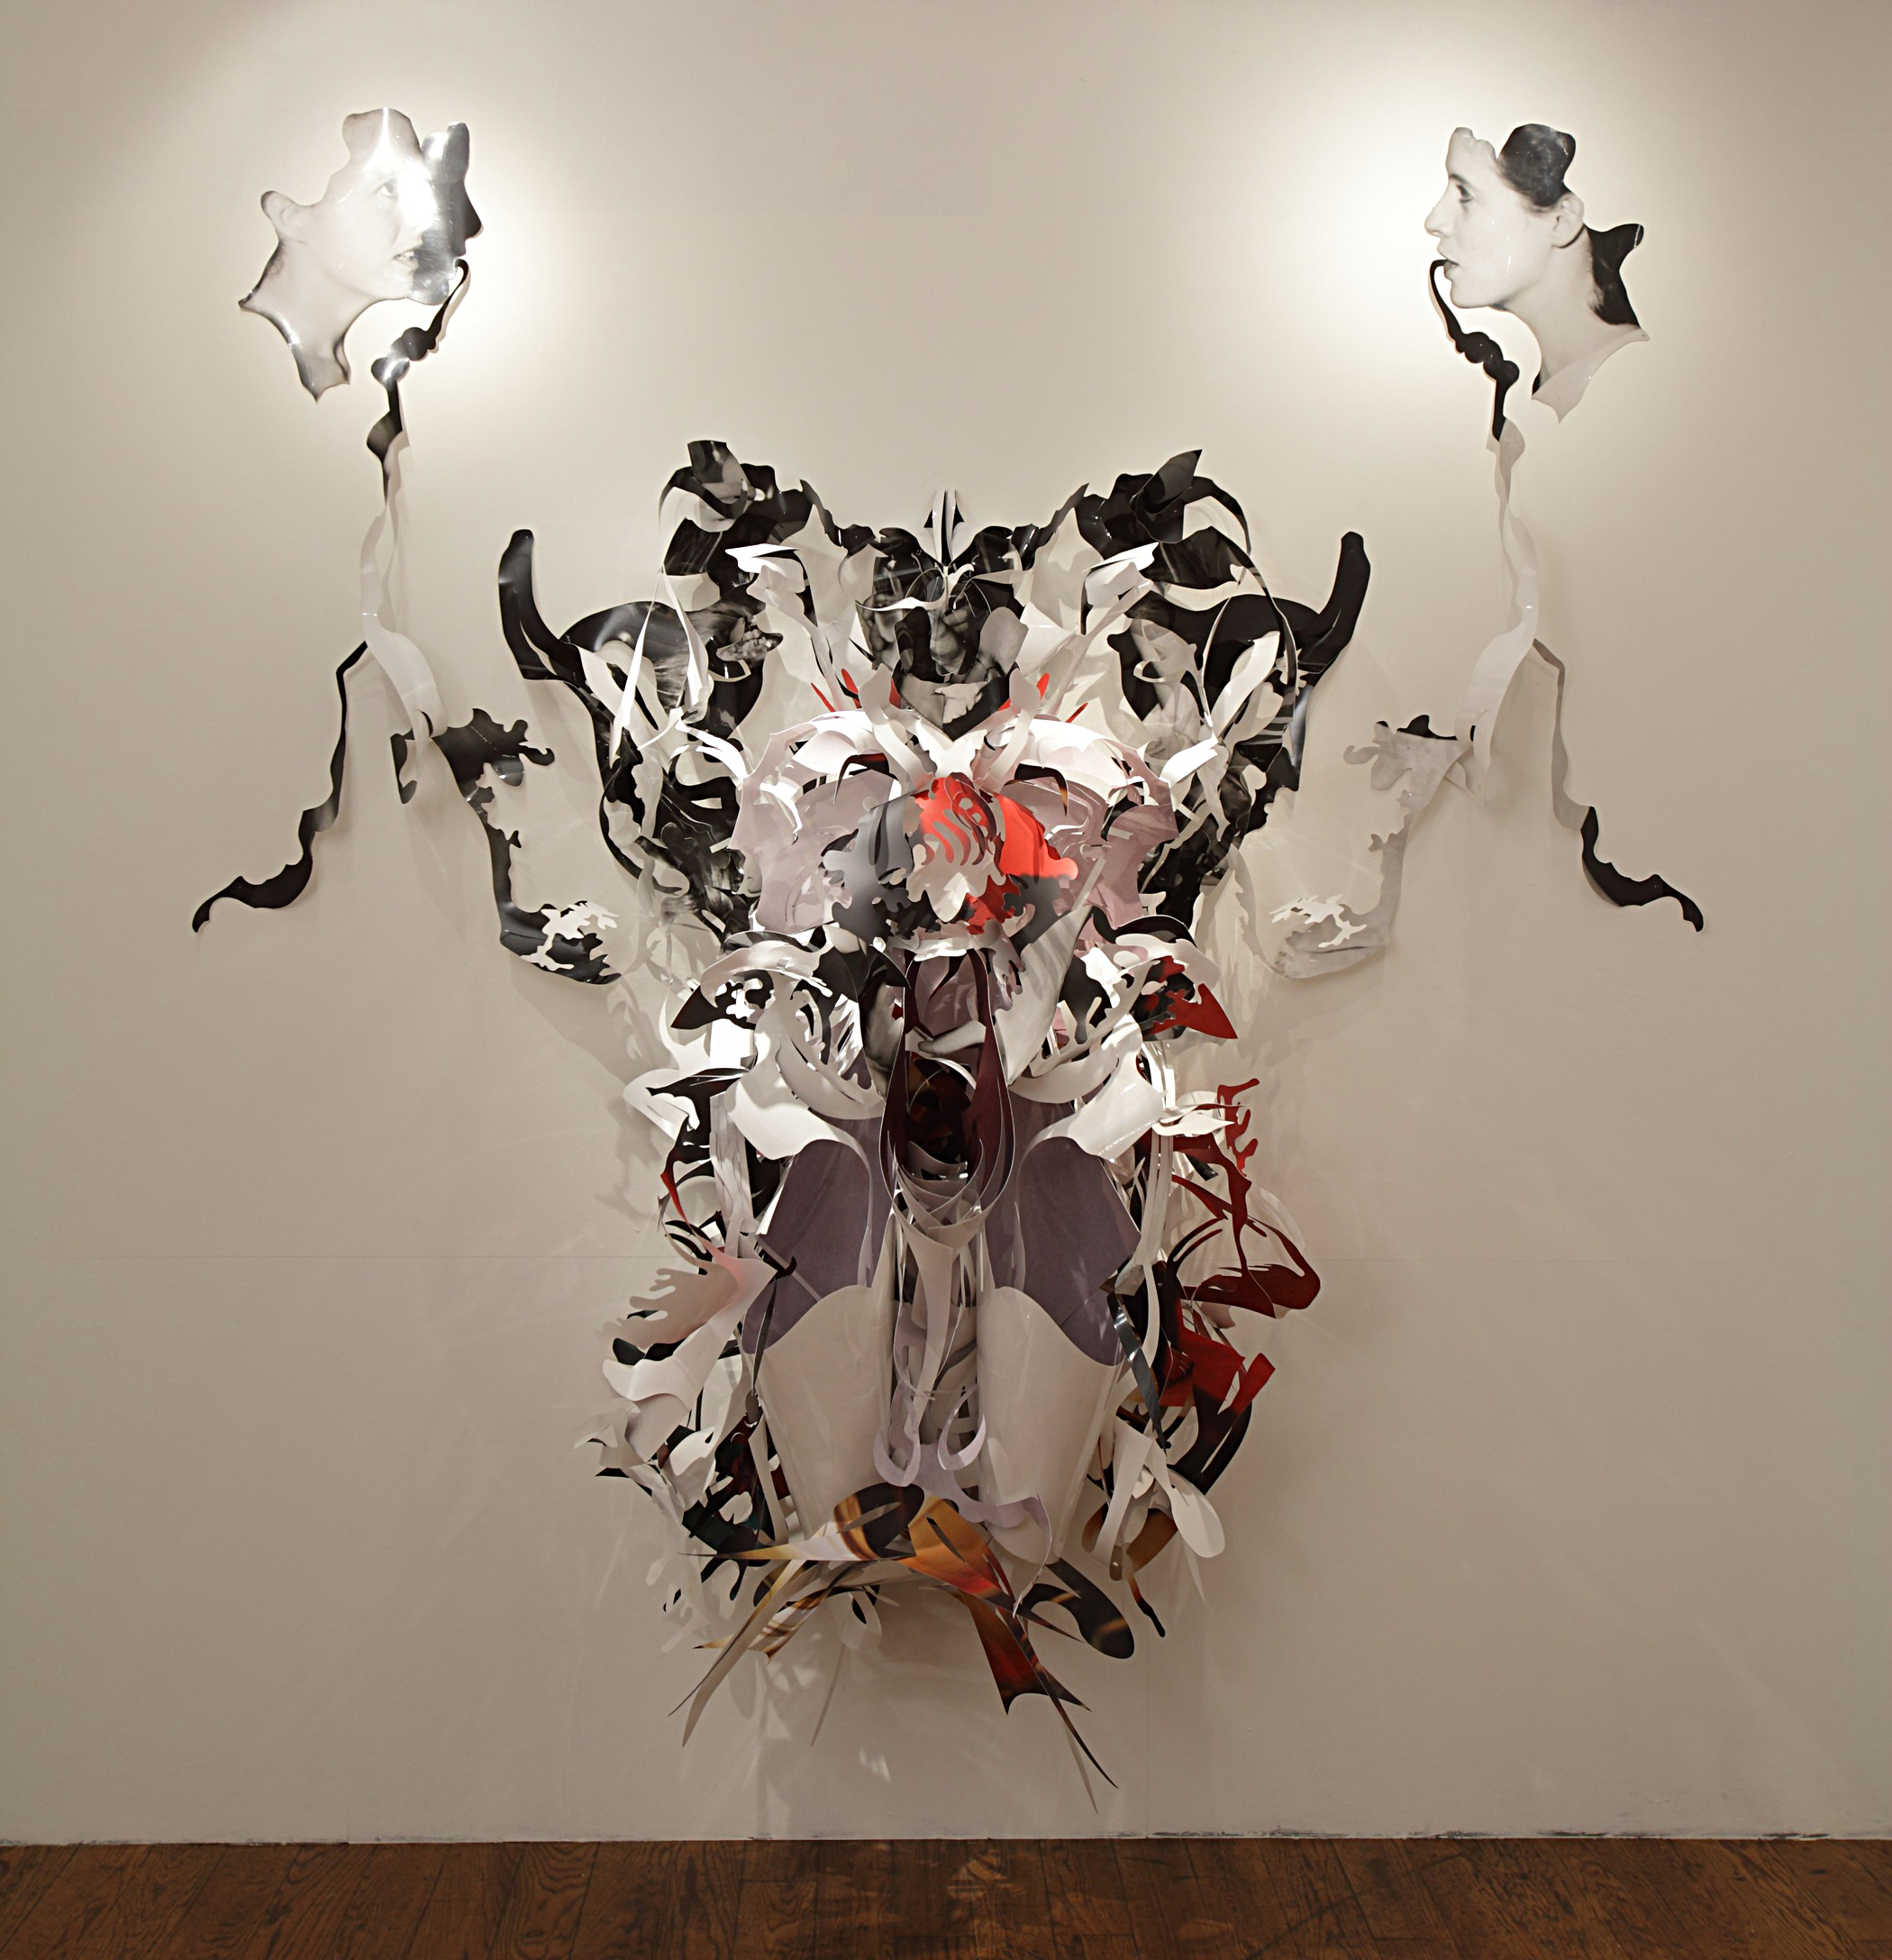 <p>L&#8217;Origine du Monde (2012), 250cm x 250cm, cutout, folded, and entwined photographs, Total Environment, Museum of Modern Art, Moscow</p>
